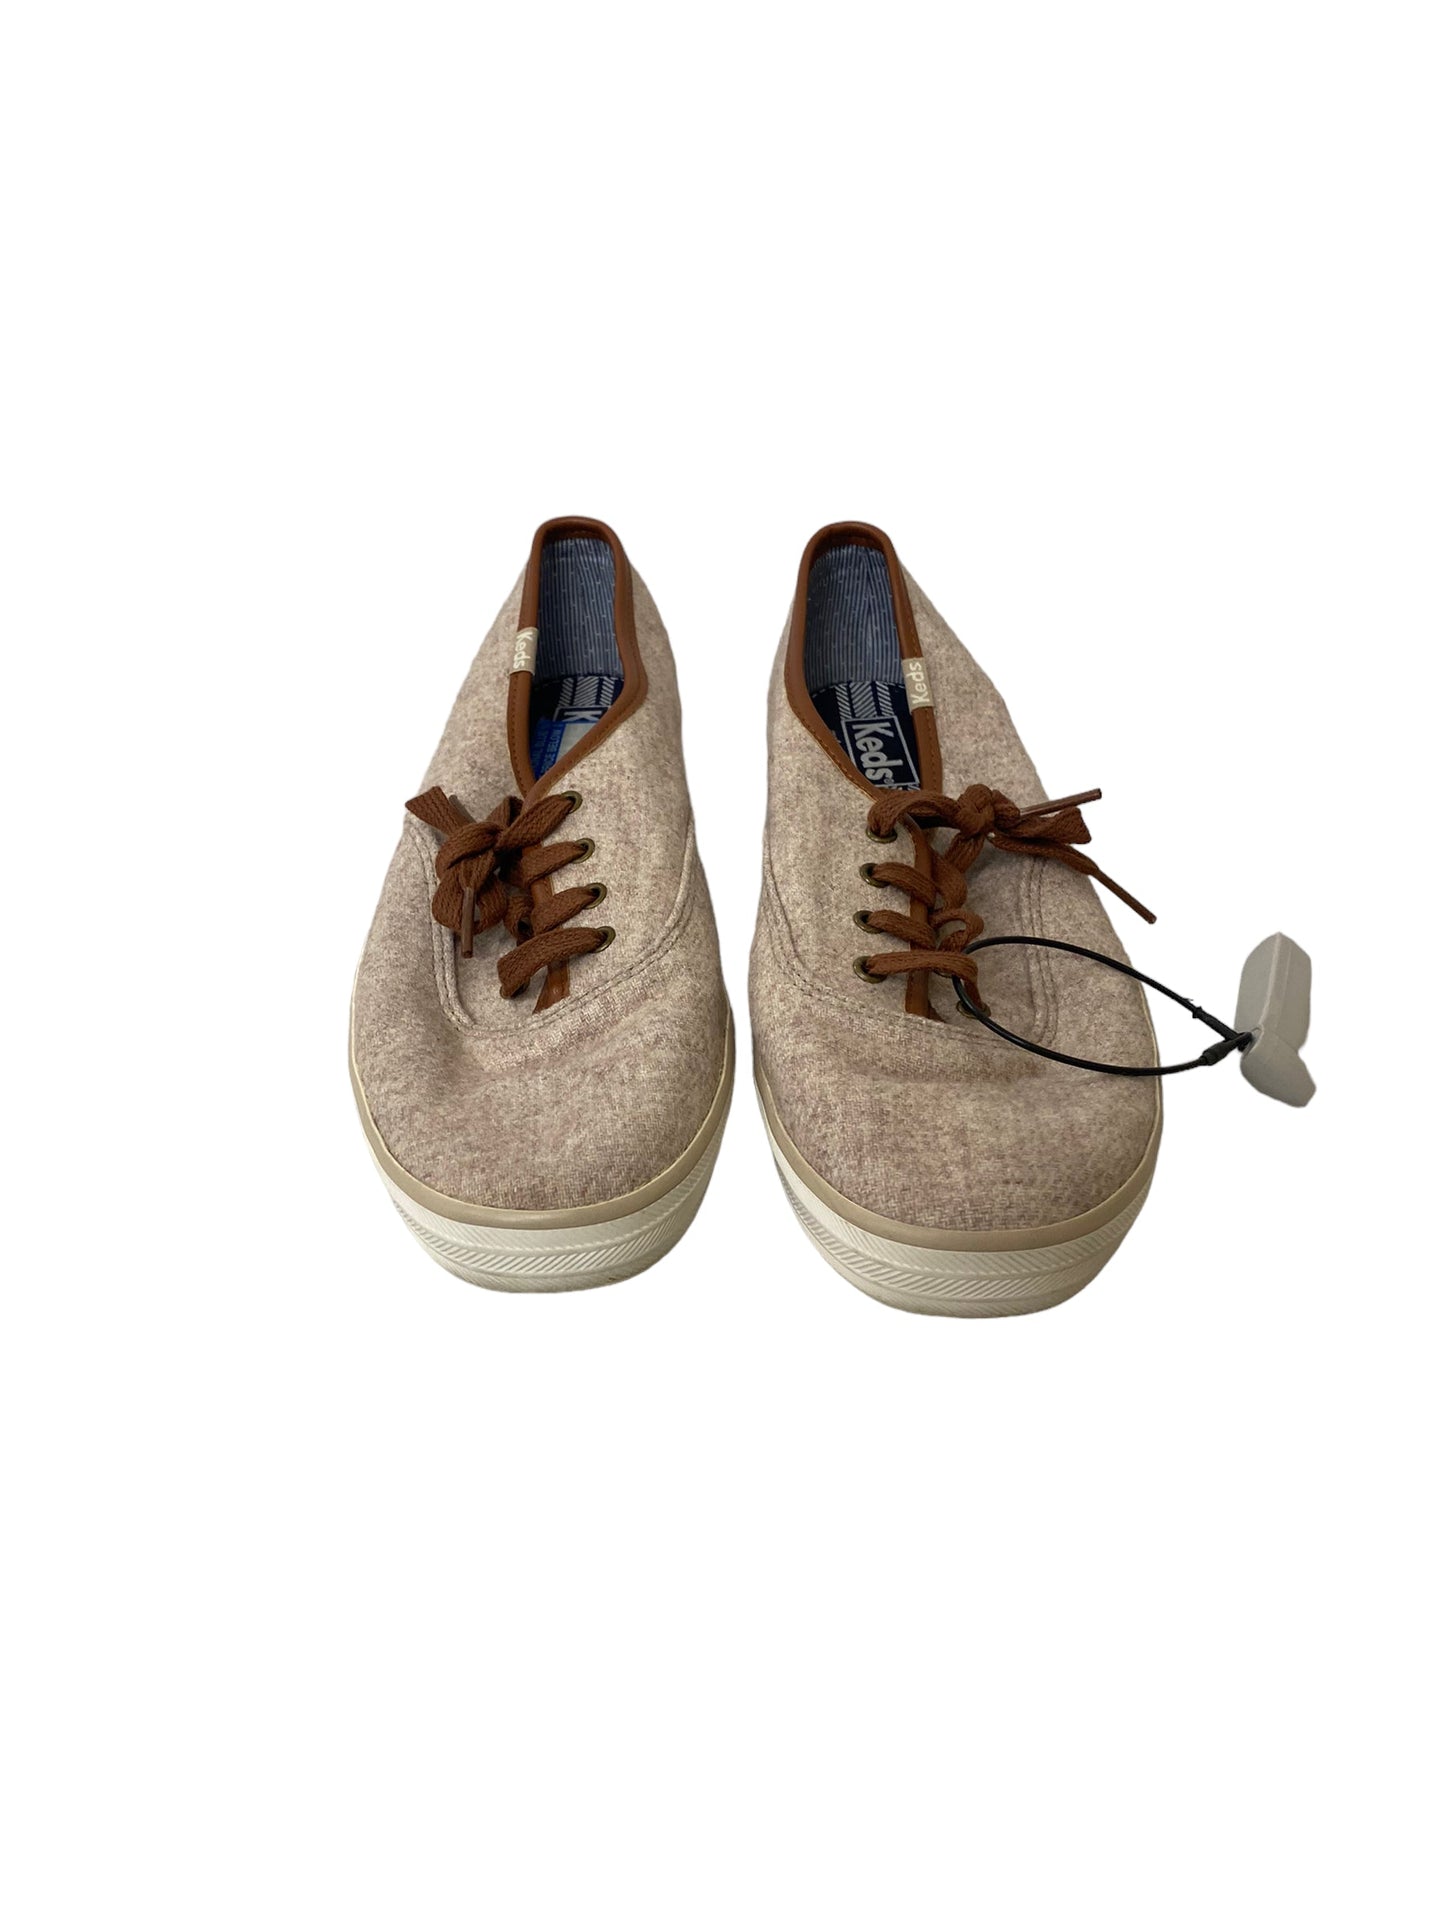 Shoes Flats Boat By Keds  Size: 9